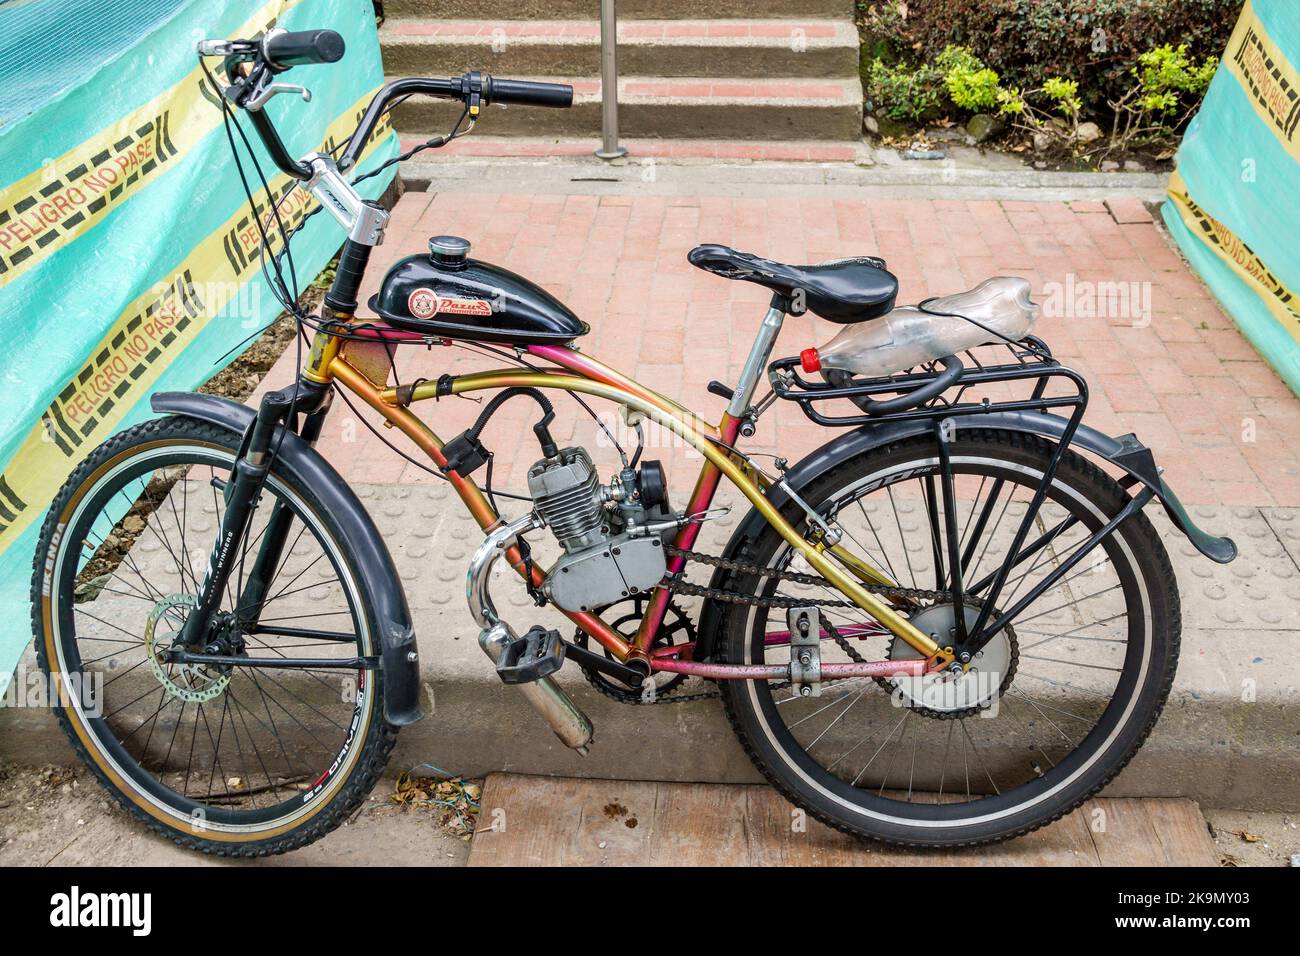 Bogota Colombia,El Chico,gas powered motorized motor bicycle,Colombian Colombians Hispanic Hispanics South America Latin American Americans Stock Photo